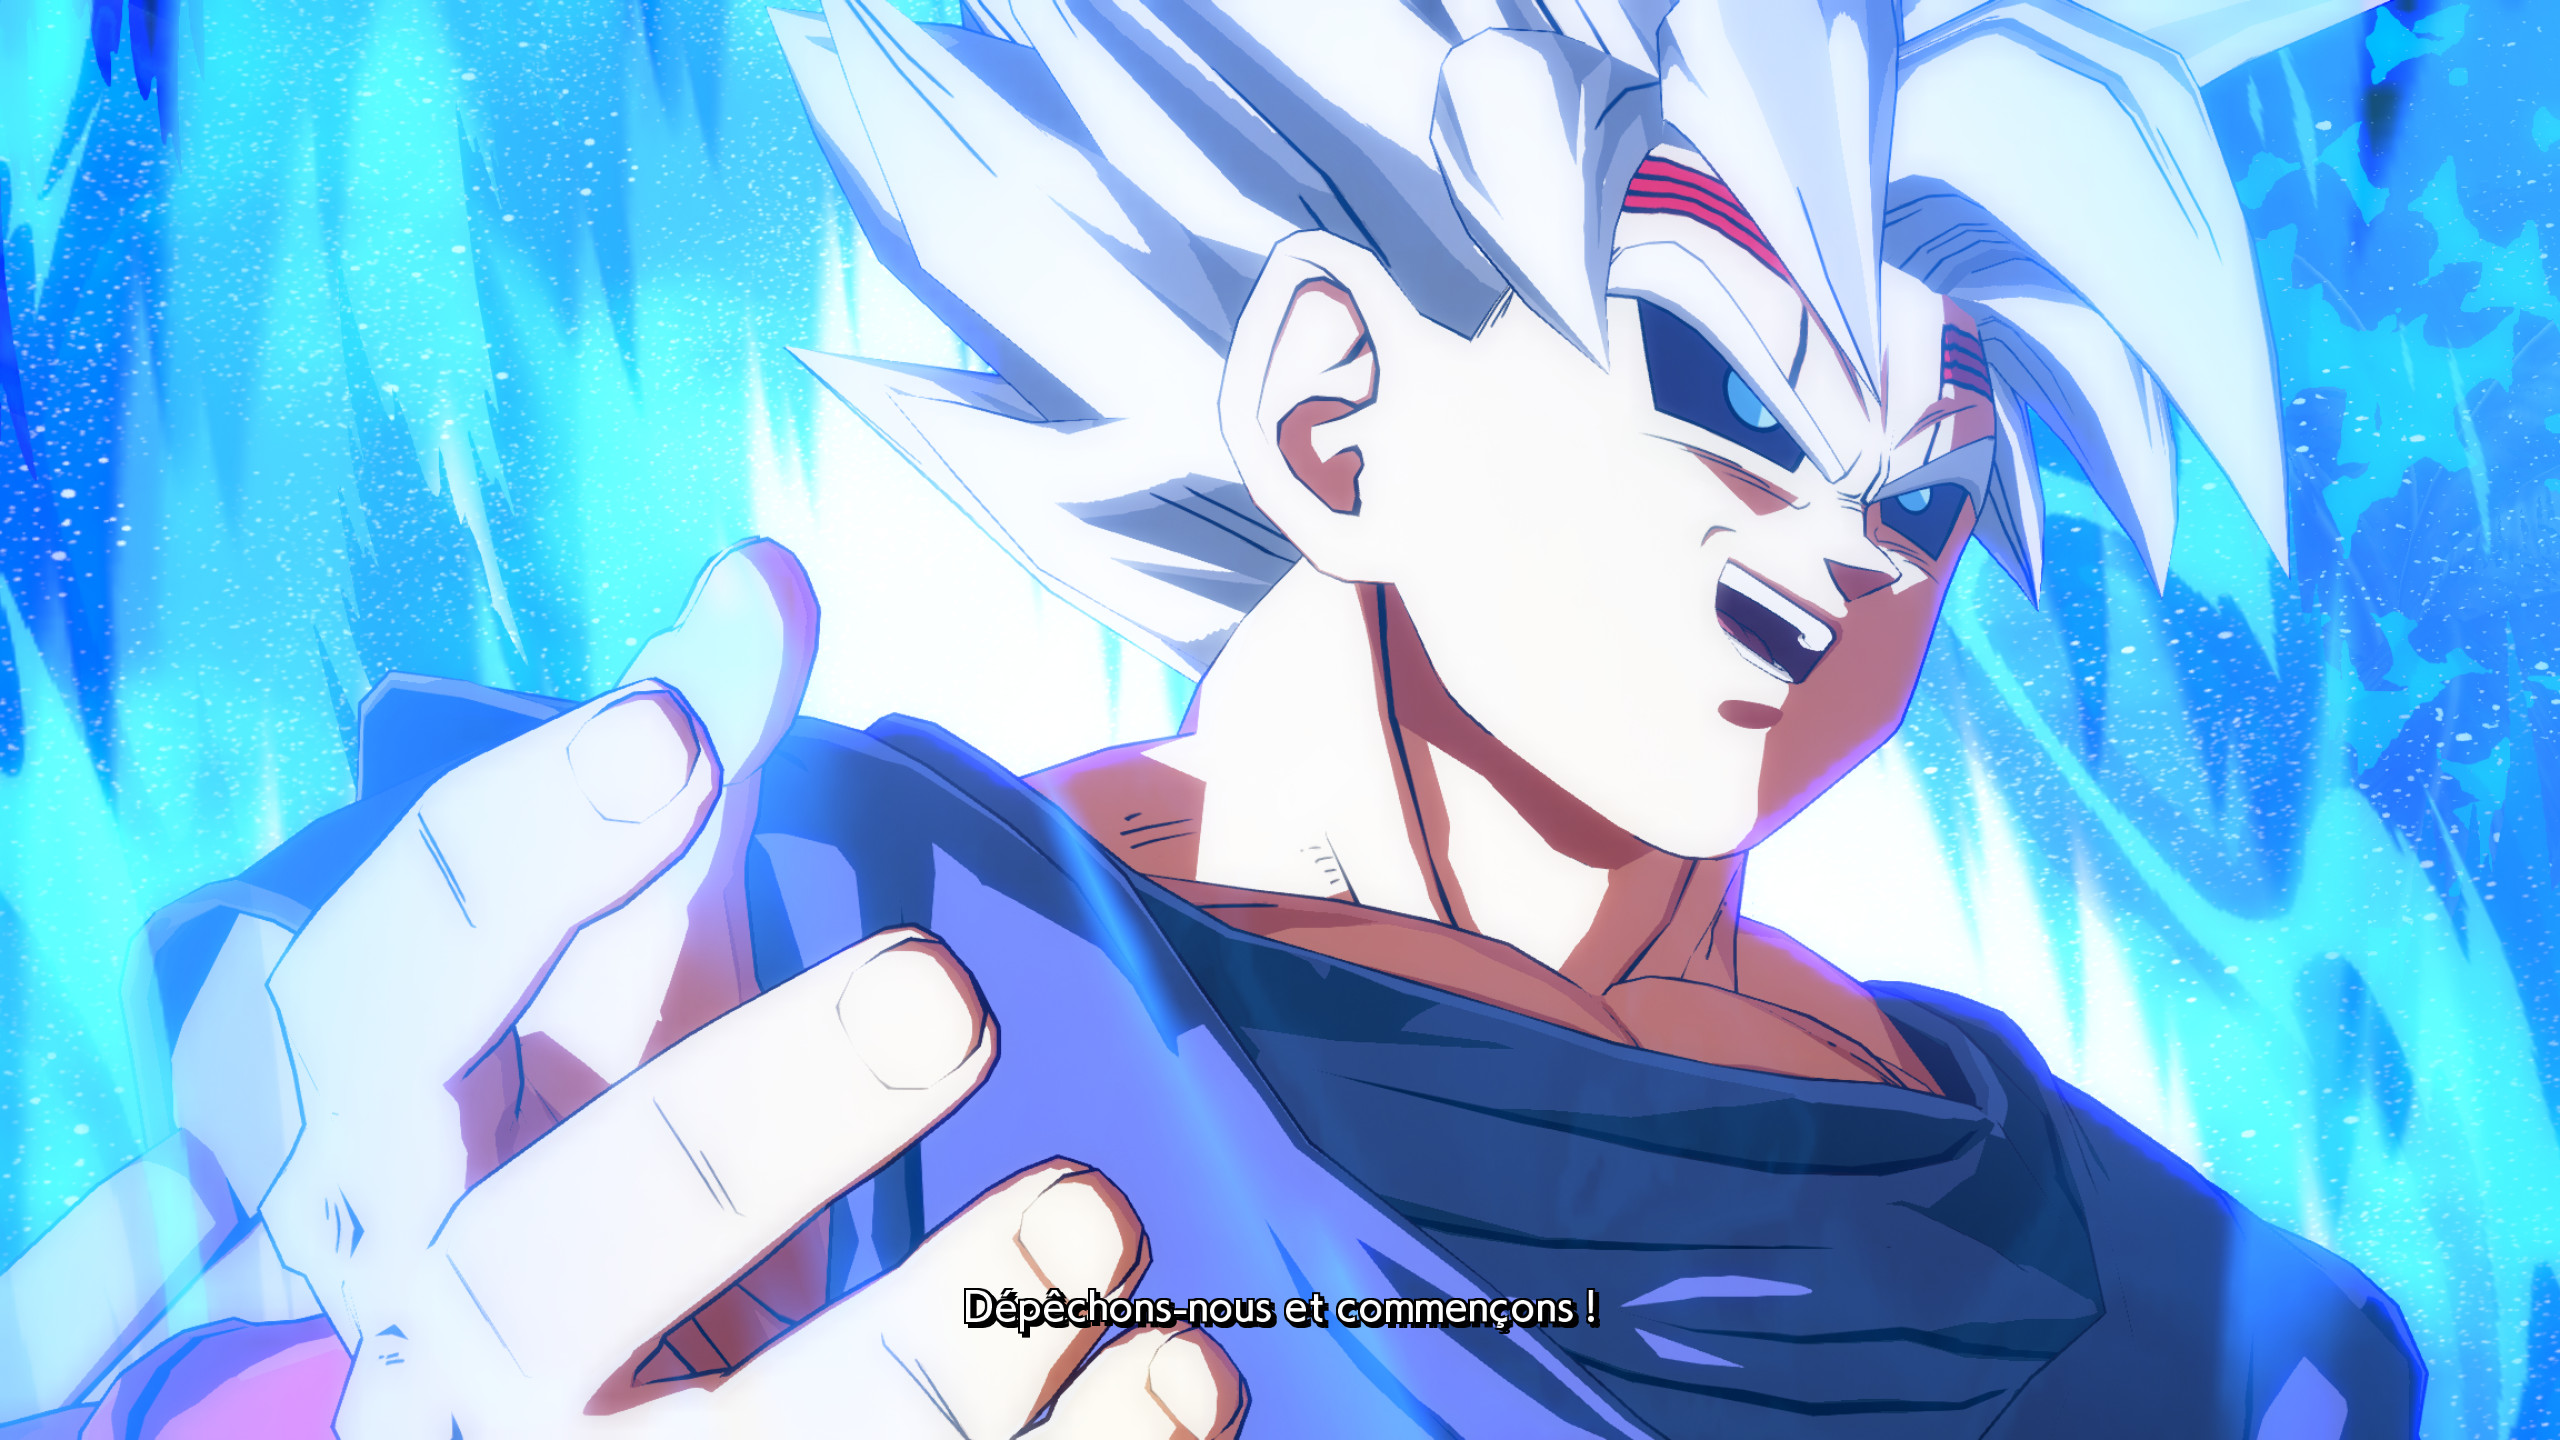 Trunks Recolor by BenichonSan (me) – FighterZ Mods